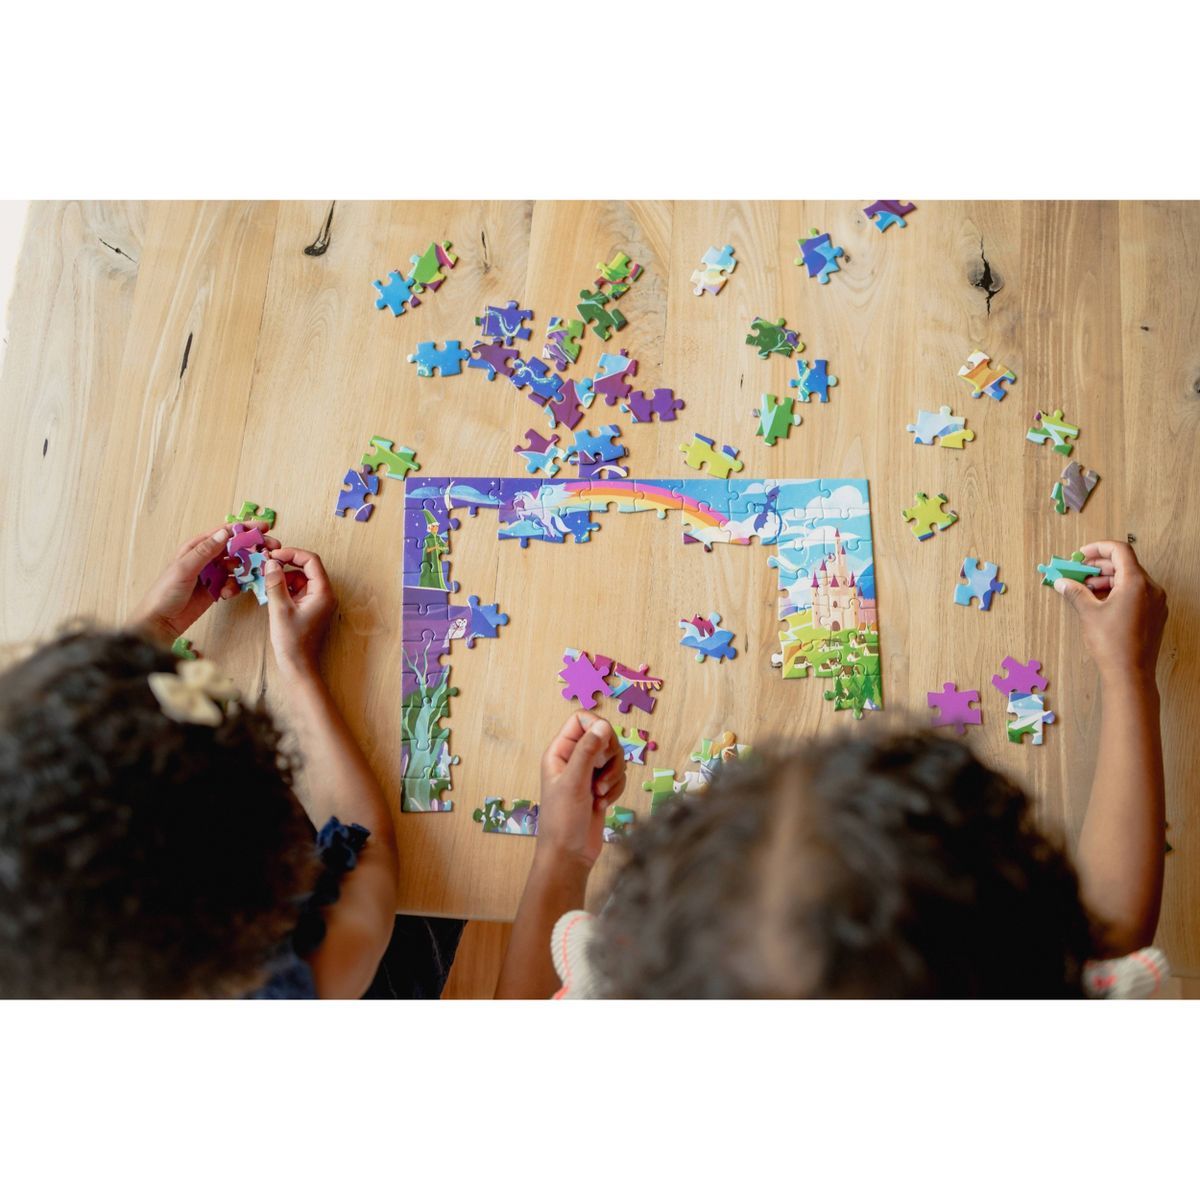 Chuckle & Roar 4 Pack of Kids Puzzles - 550pc | Target